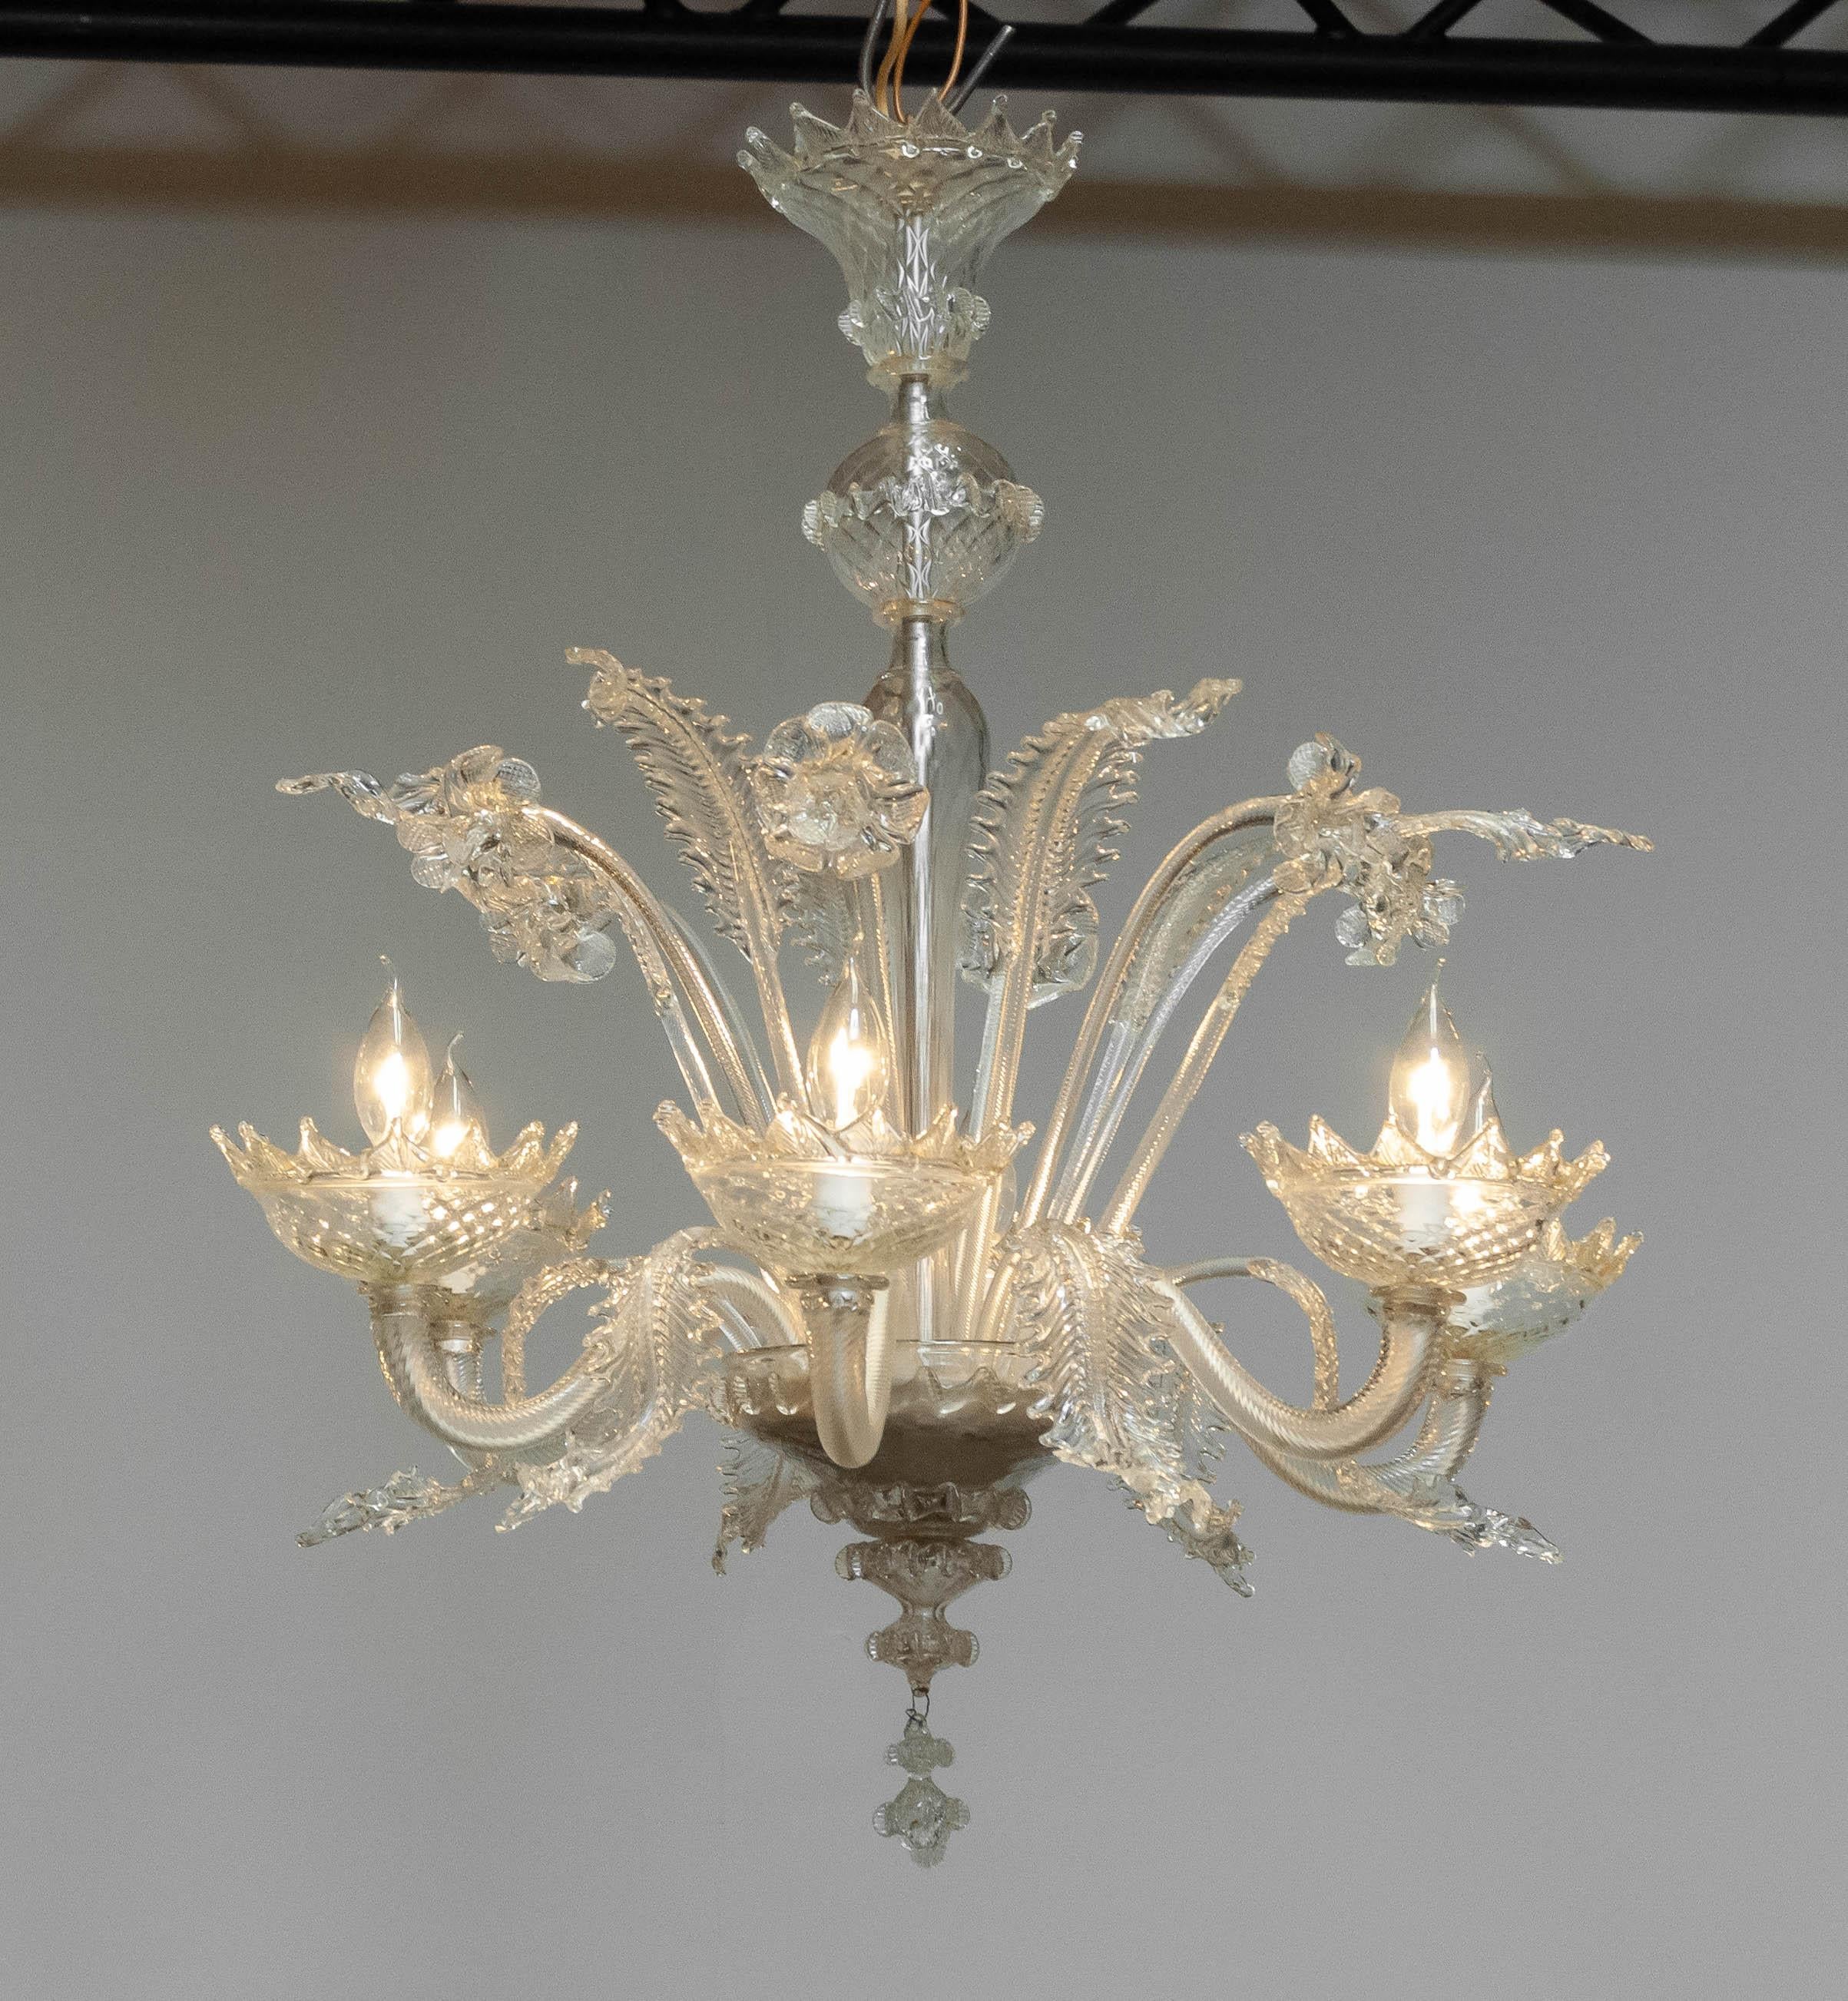 Baroque 1940's Large Clear Art Glass Murano Barrochi Chandelier by Barovier & Toso Italy For Sale